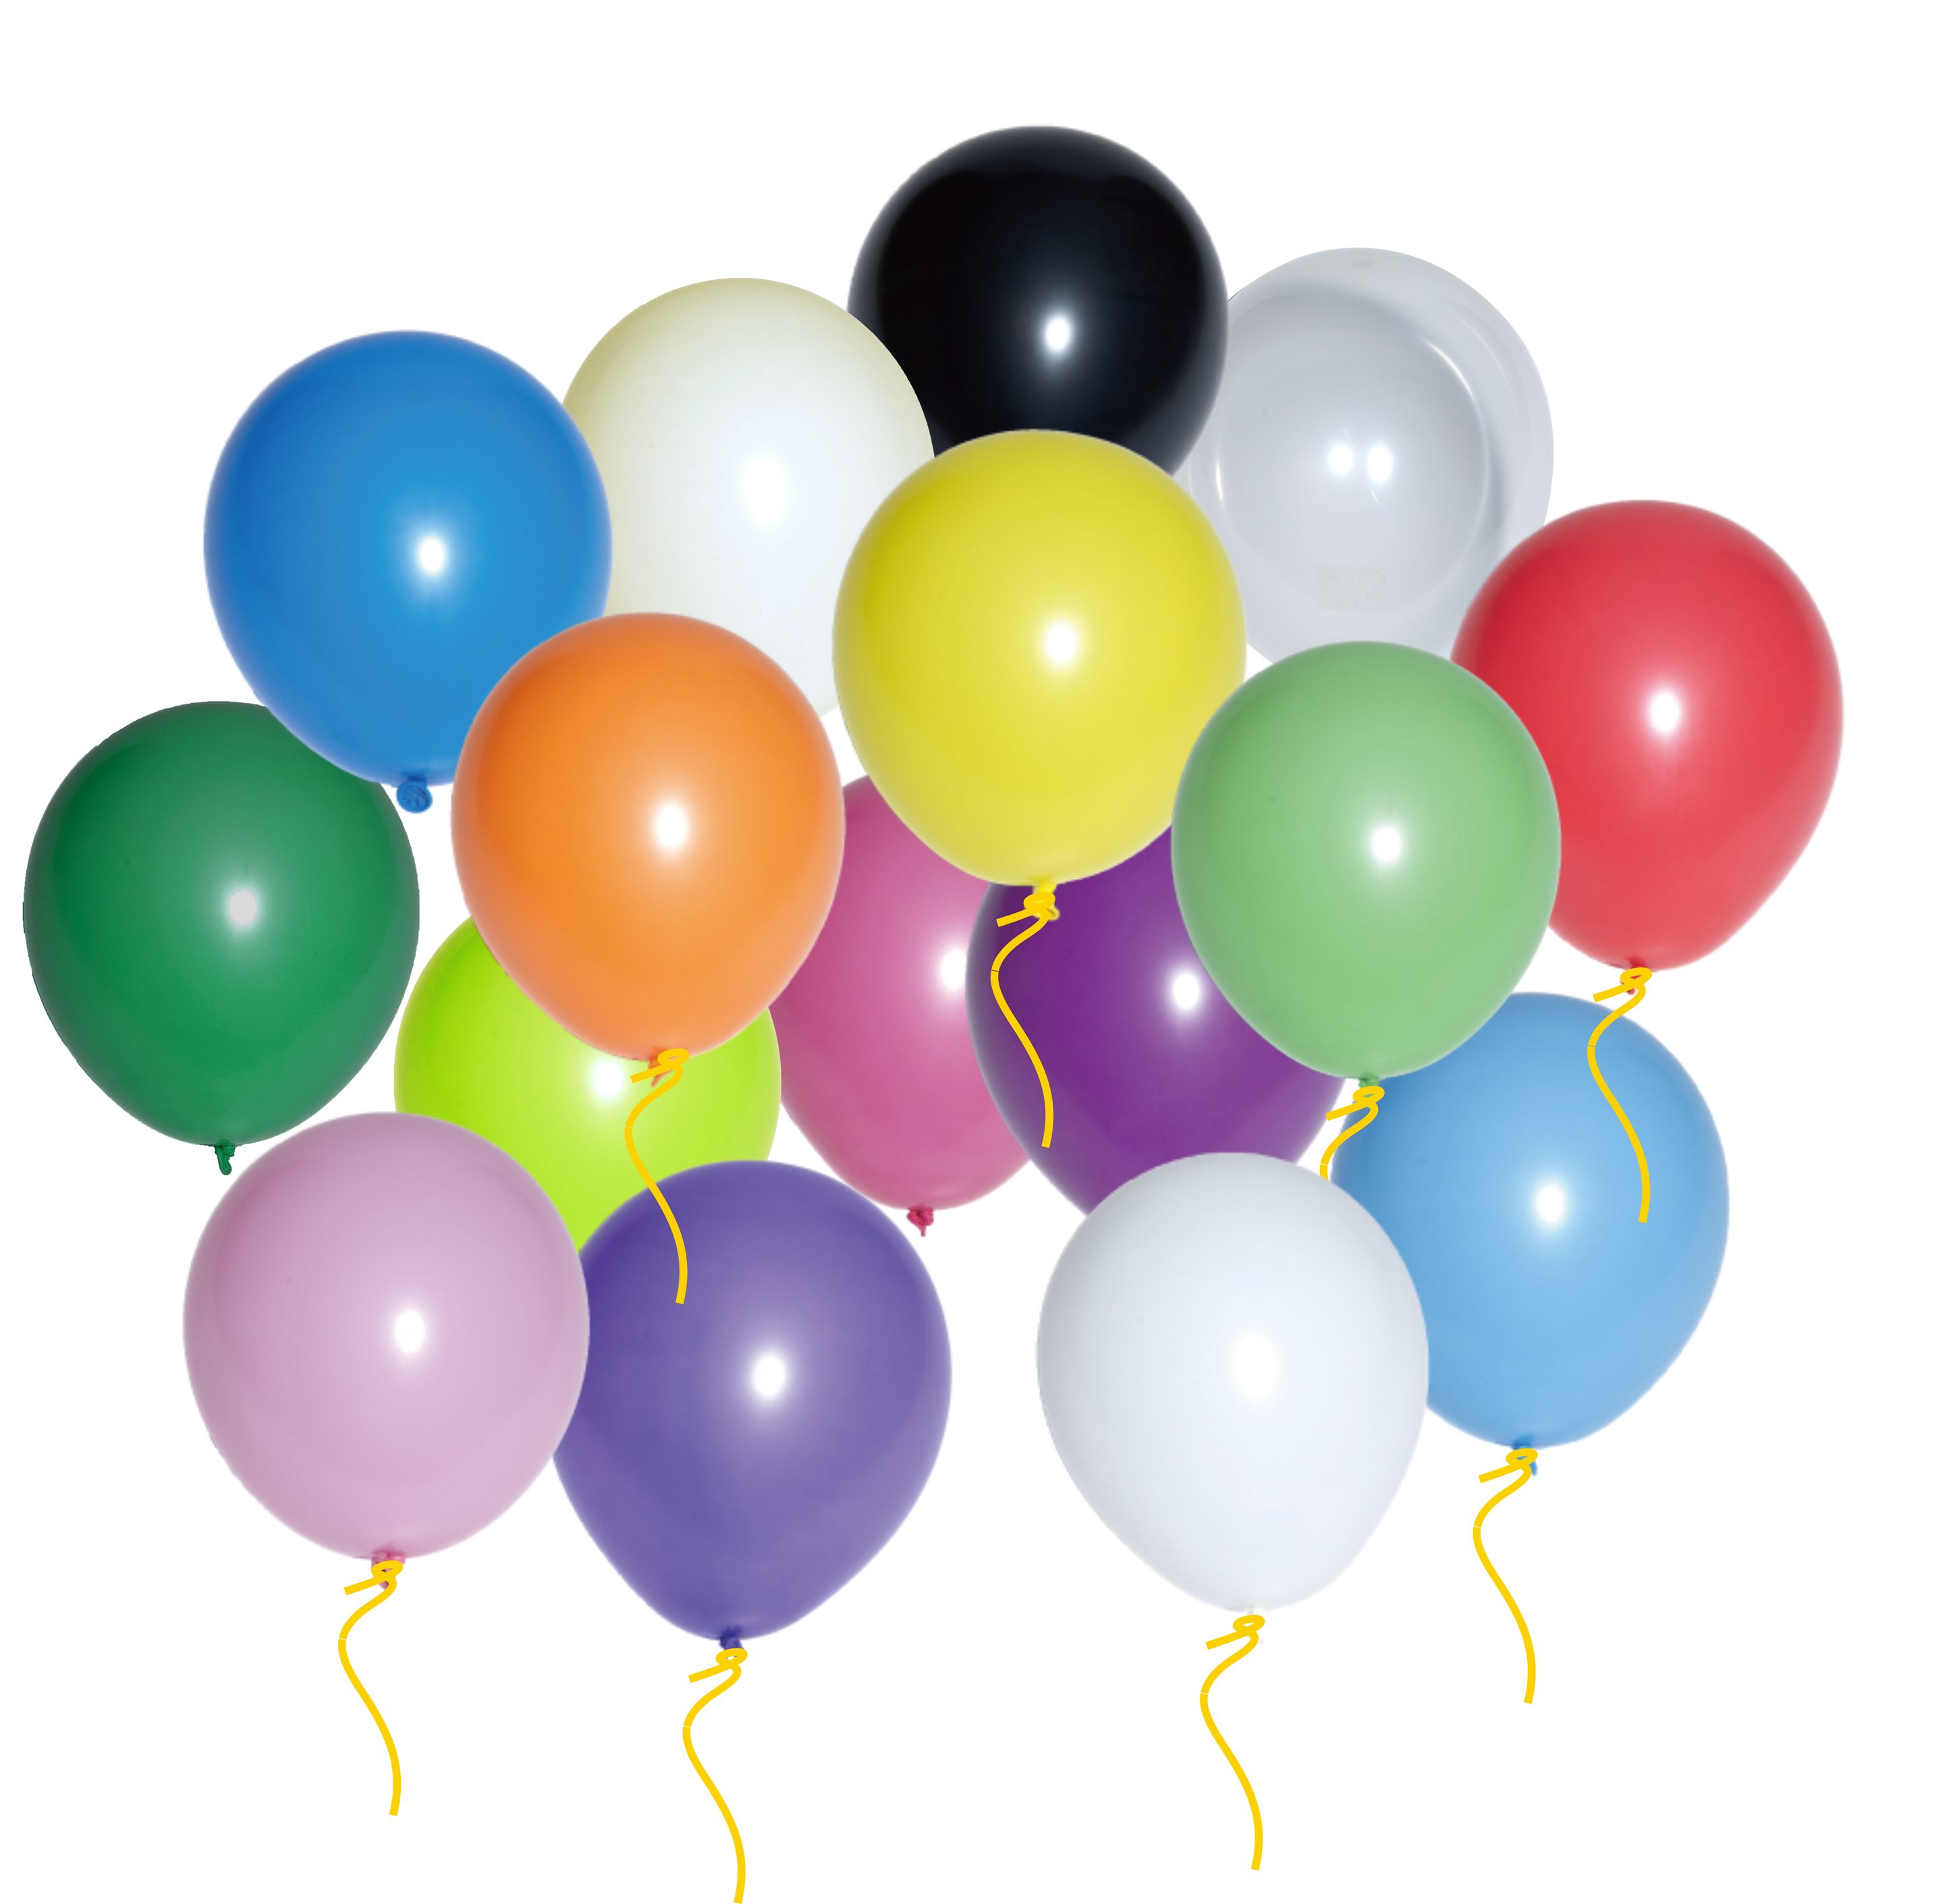 10-inches-bag-of-balloons-72-ct-assorted-color-latex-balloons